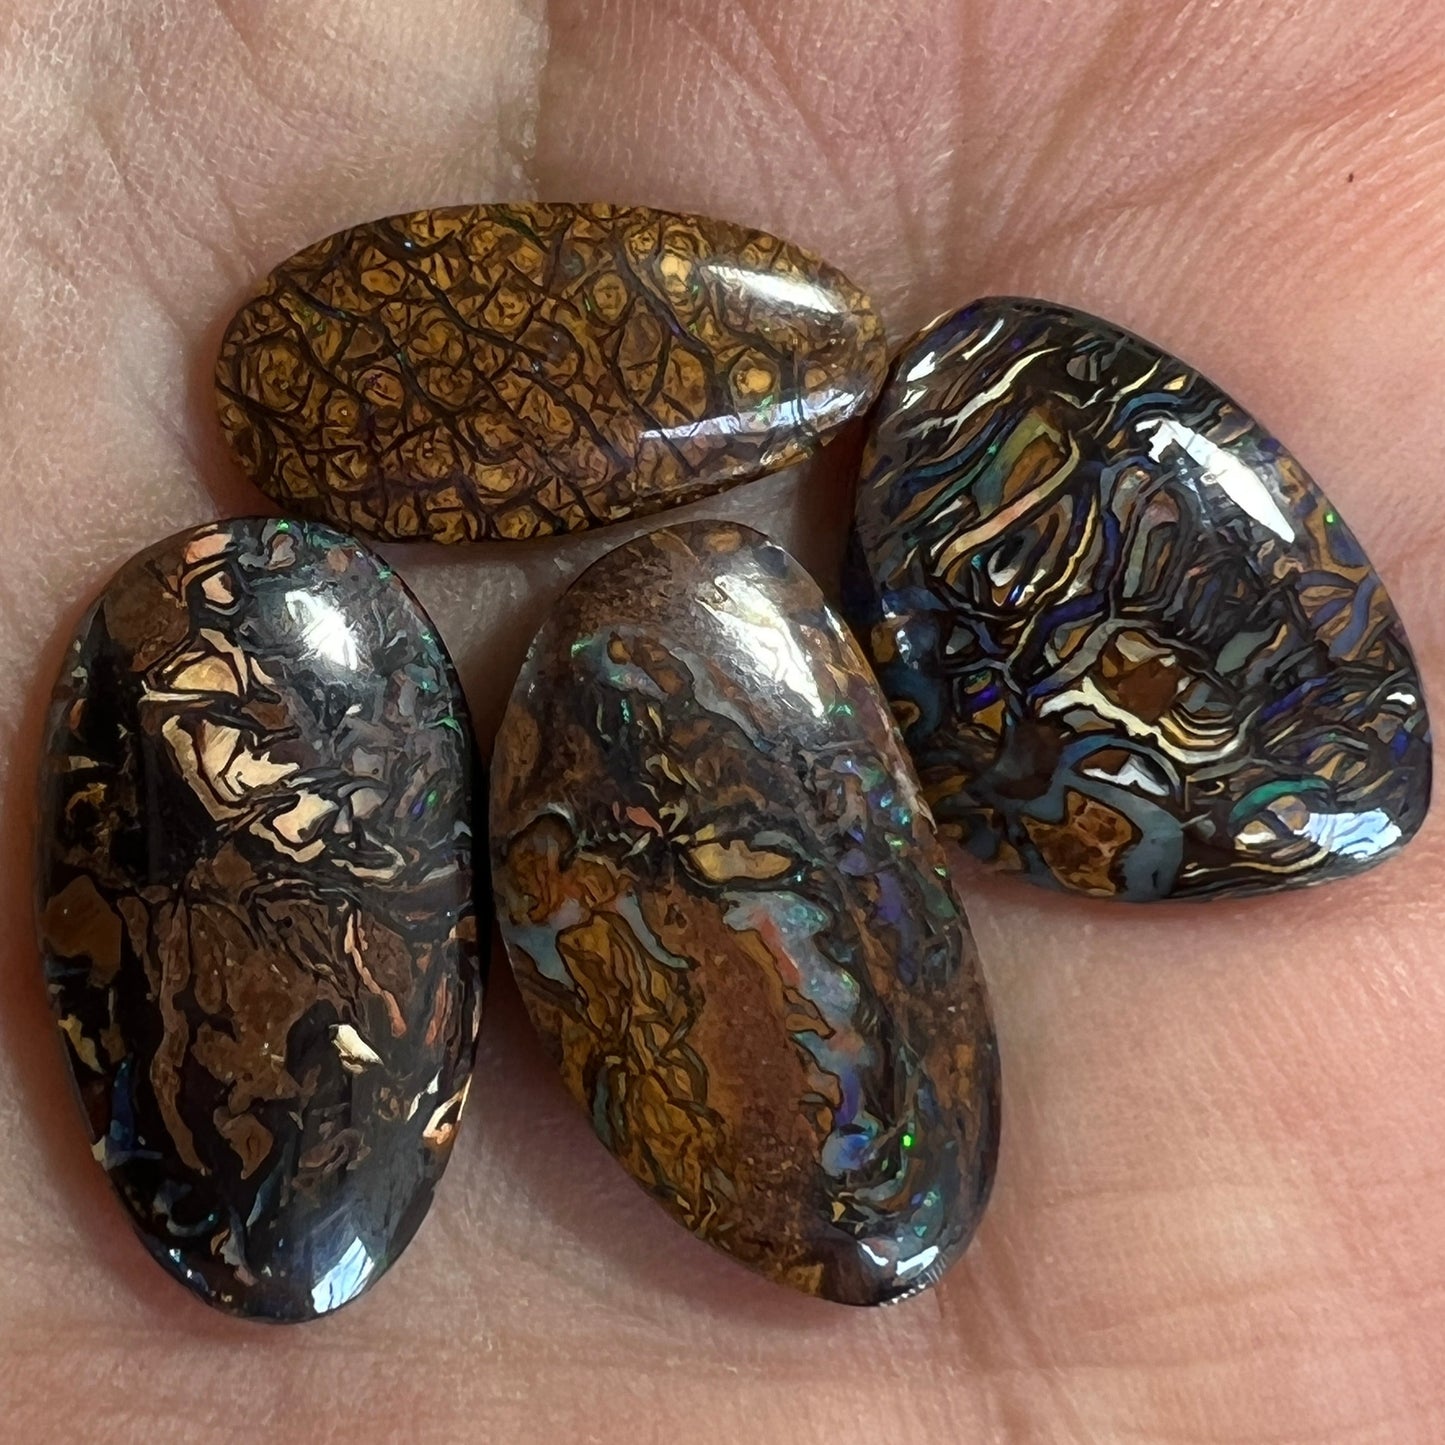 Lovely group of Queensland boulder opals with great patterns and colour.